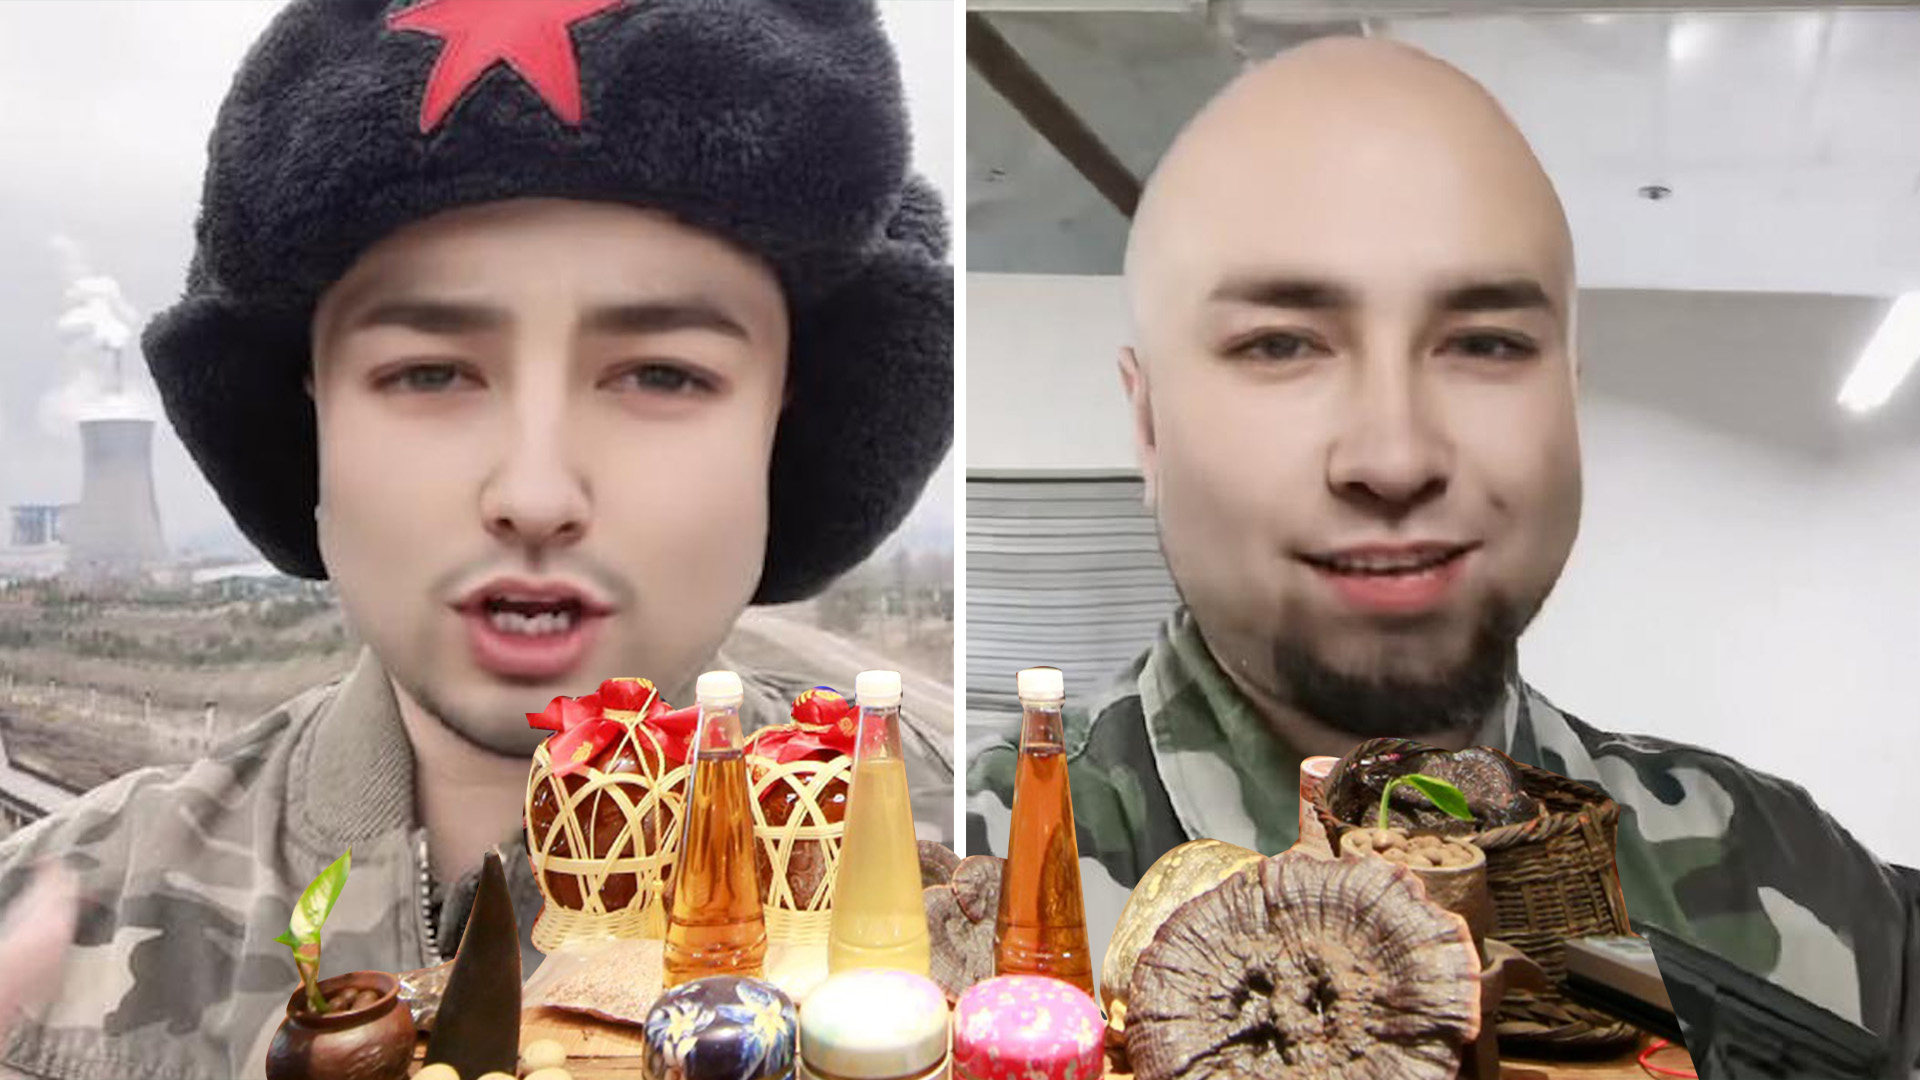 Mainland social media observers have exposed an influencer in China who claimed to be a Russian soldier fighting against Ukraine as an imposter simply out to make money. Photo: SCMP composite/Weibo